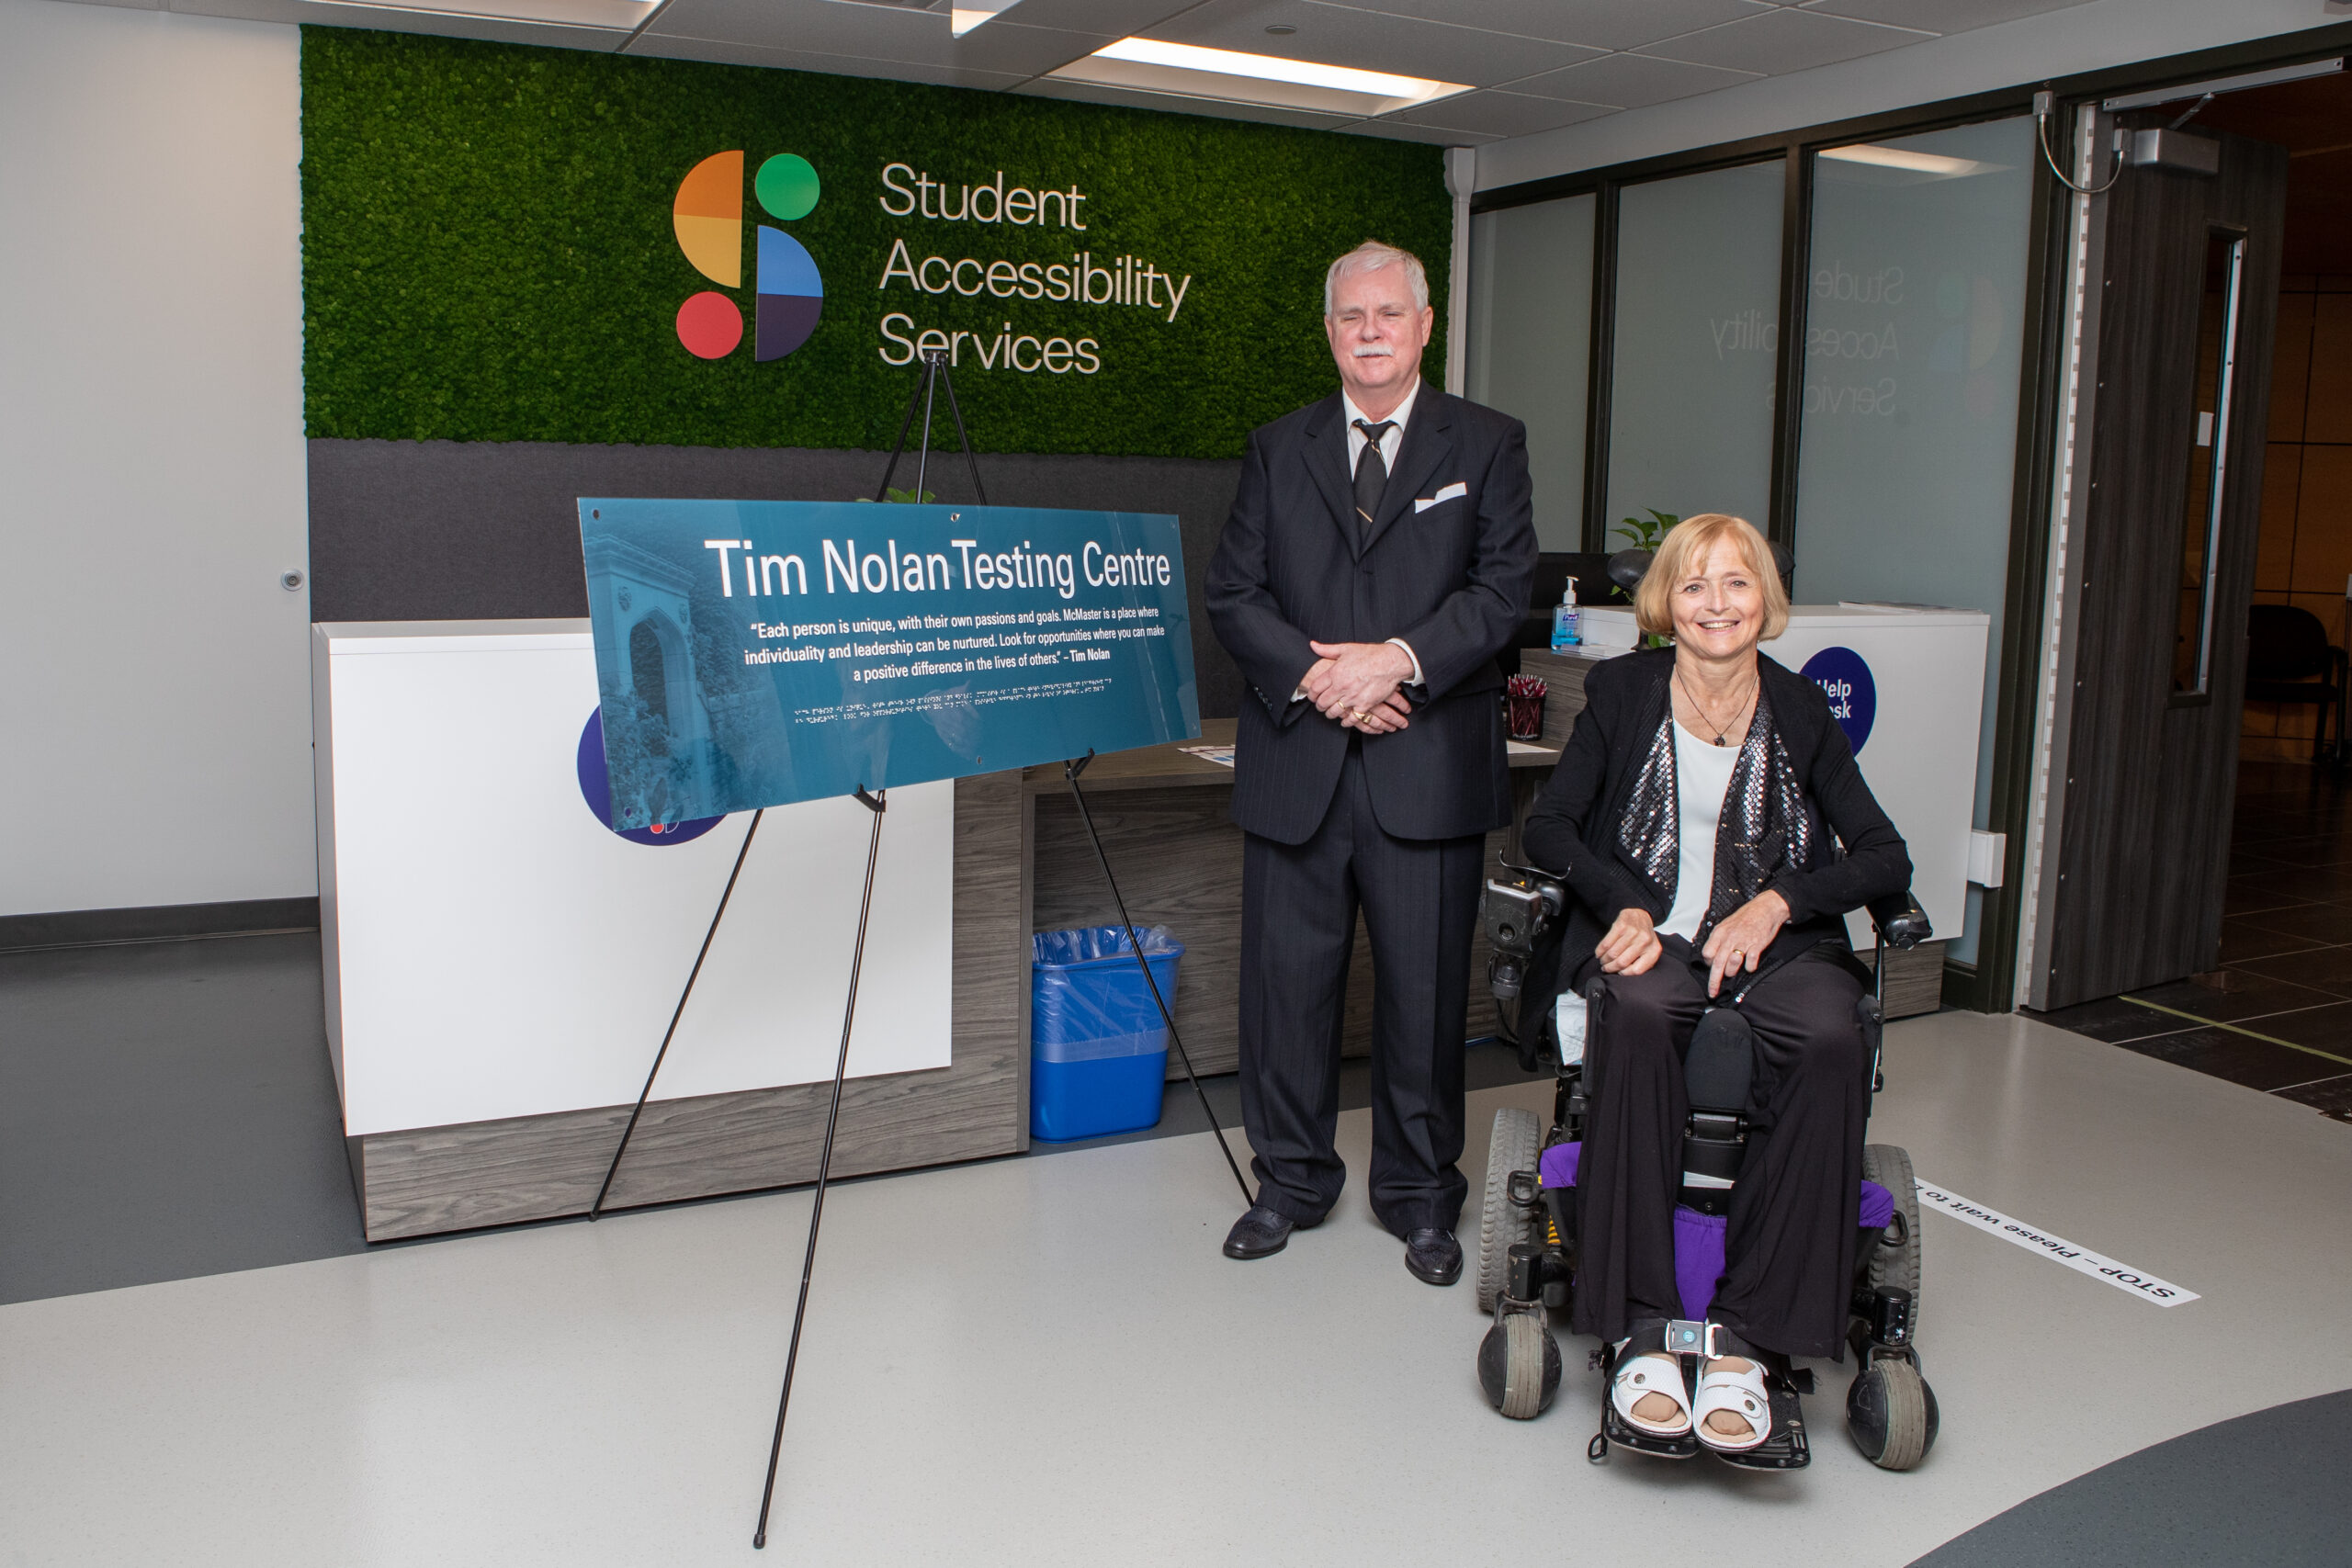 Tim Nolan, the former director of Student Accessibility Services (SAS) who worked at McMaster from 1988 until his retirement in 2020, alongside his wife and fellow accessibility advocate, Kim Nolan. In August 2022, the SAS testing centre was renamed the Tim Nolan Testing Centre in recognition of Nolan’s longstanding advocacy for accessibility and accommodation on campus.